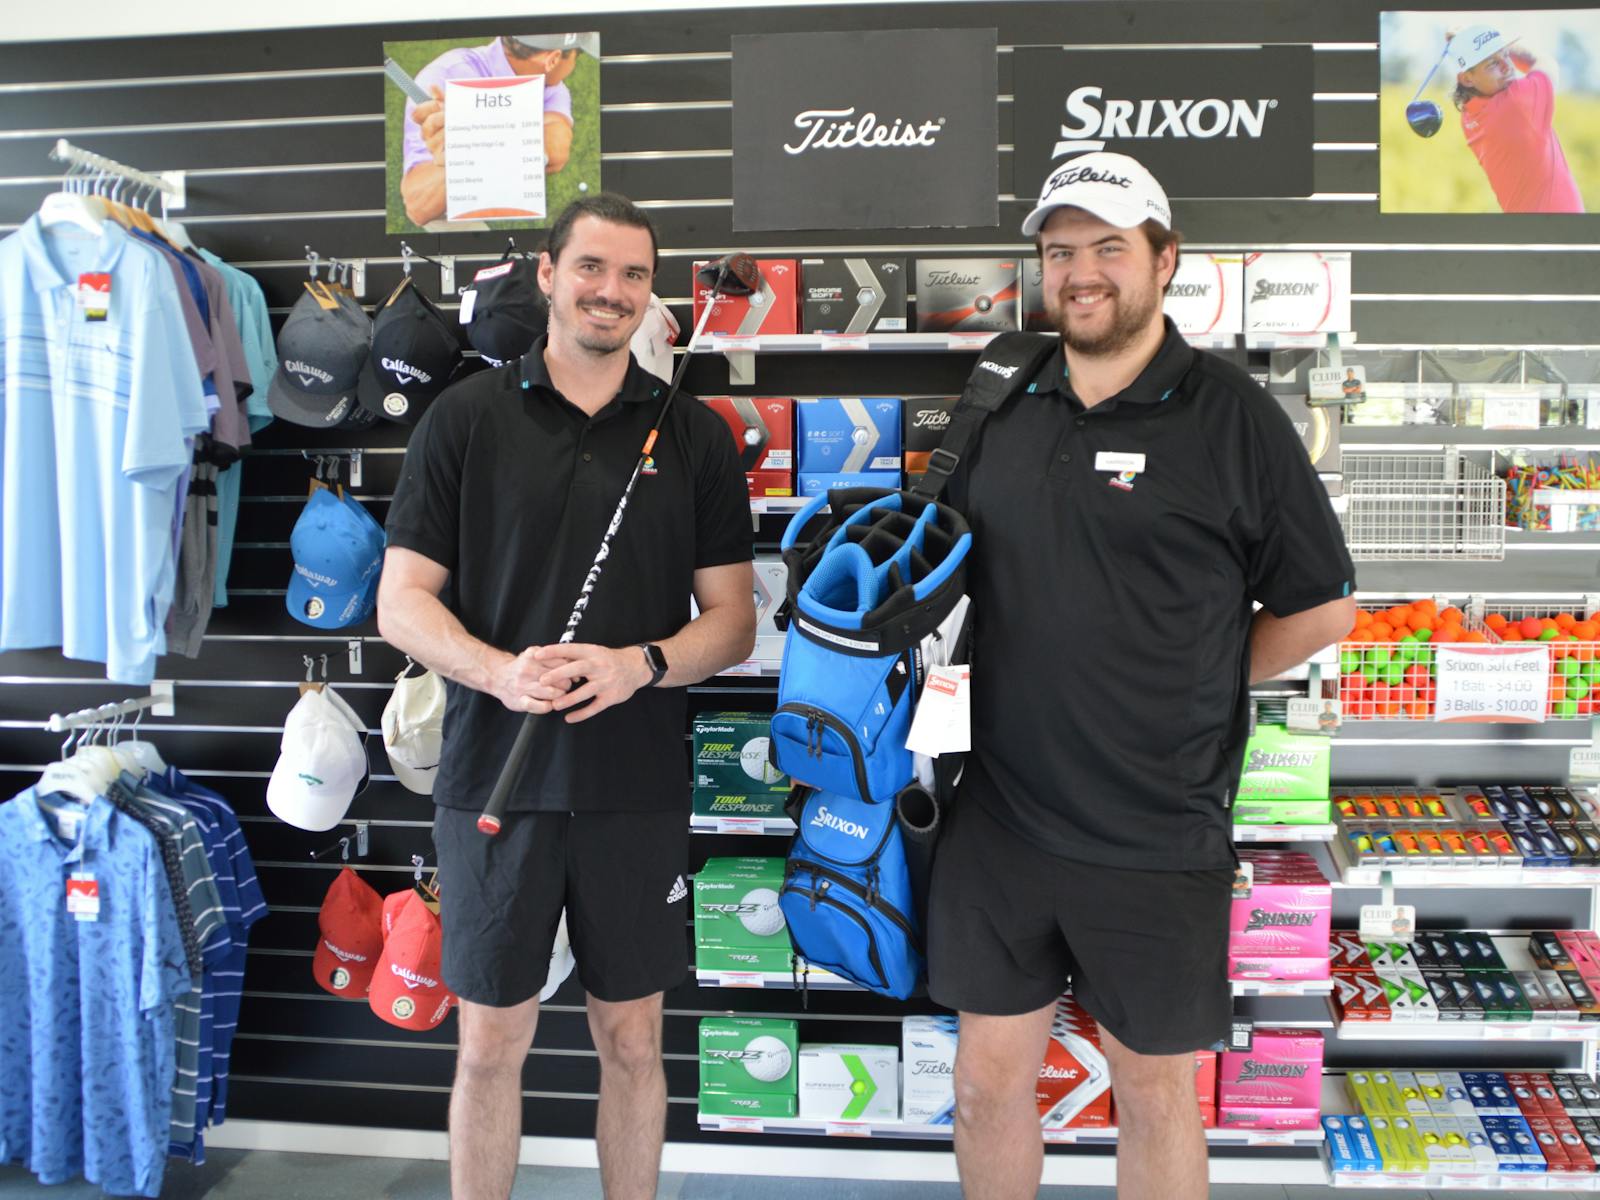 Two men stading in front of the golf retail display